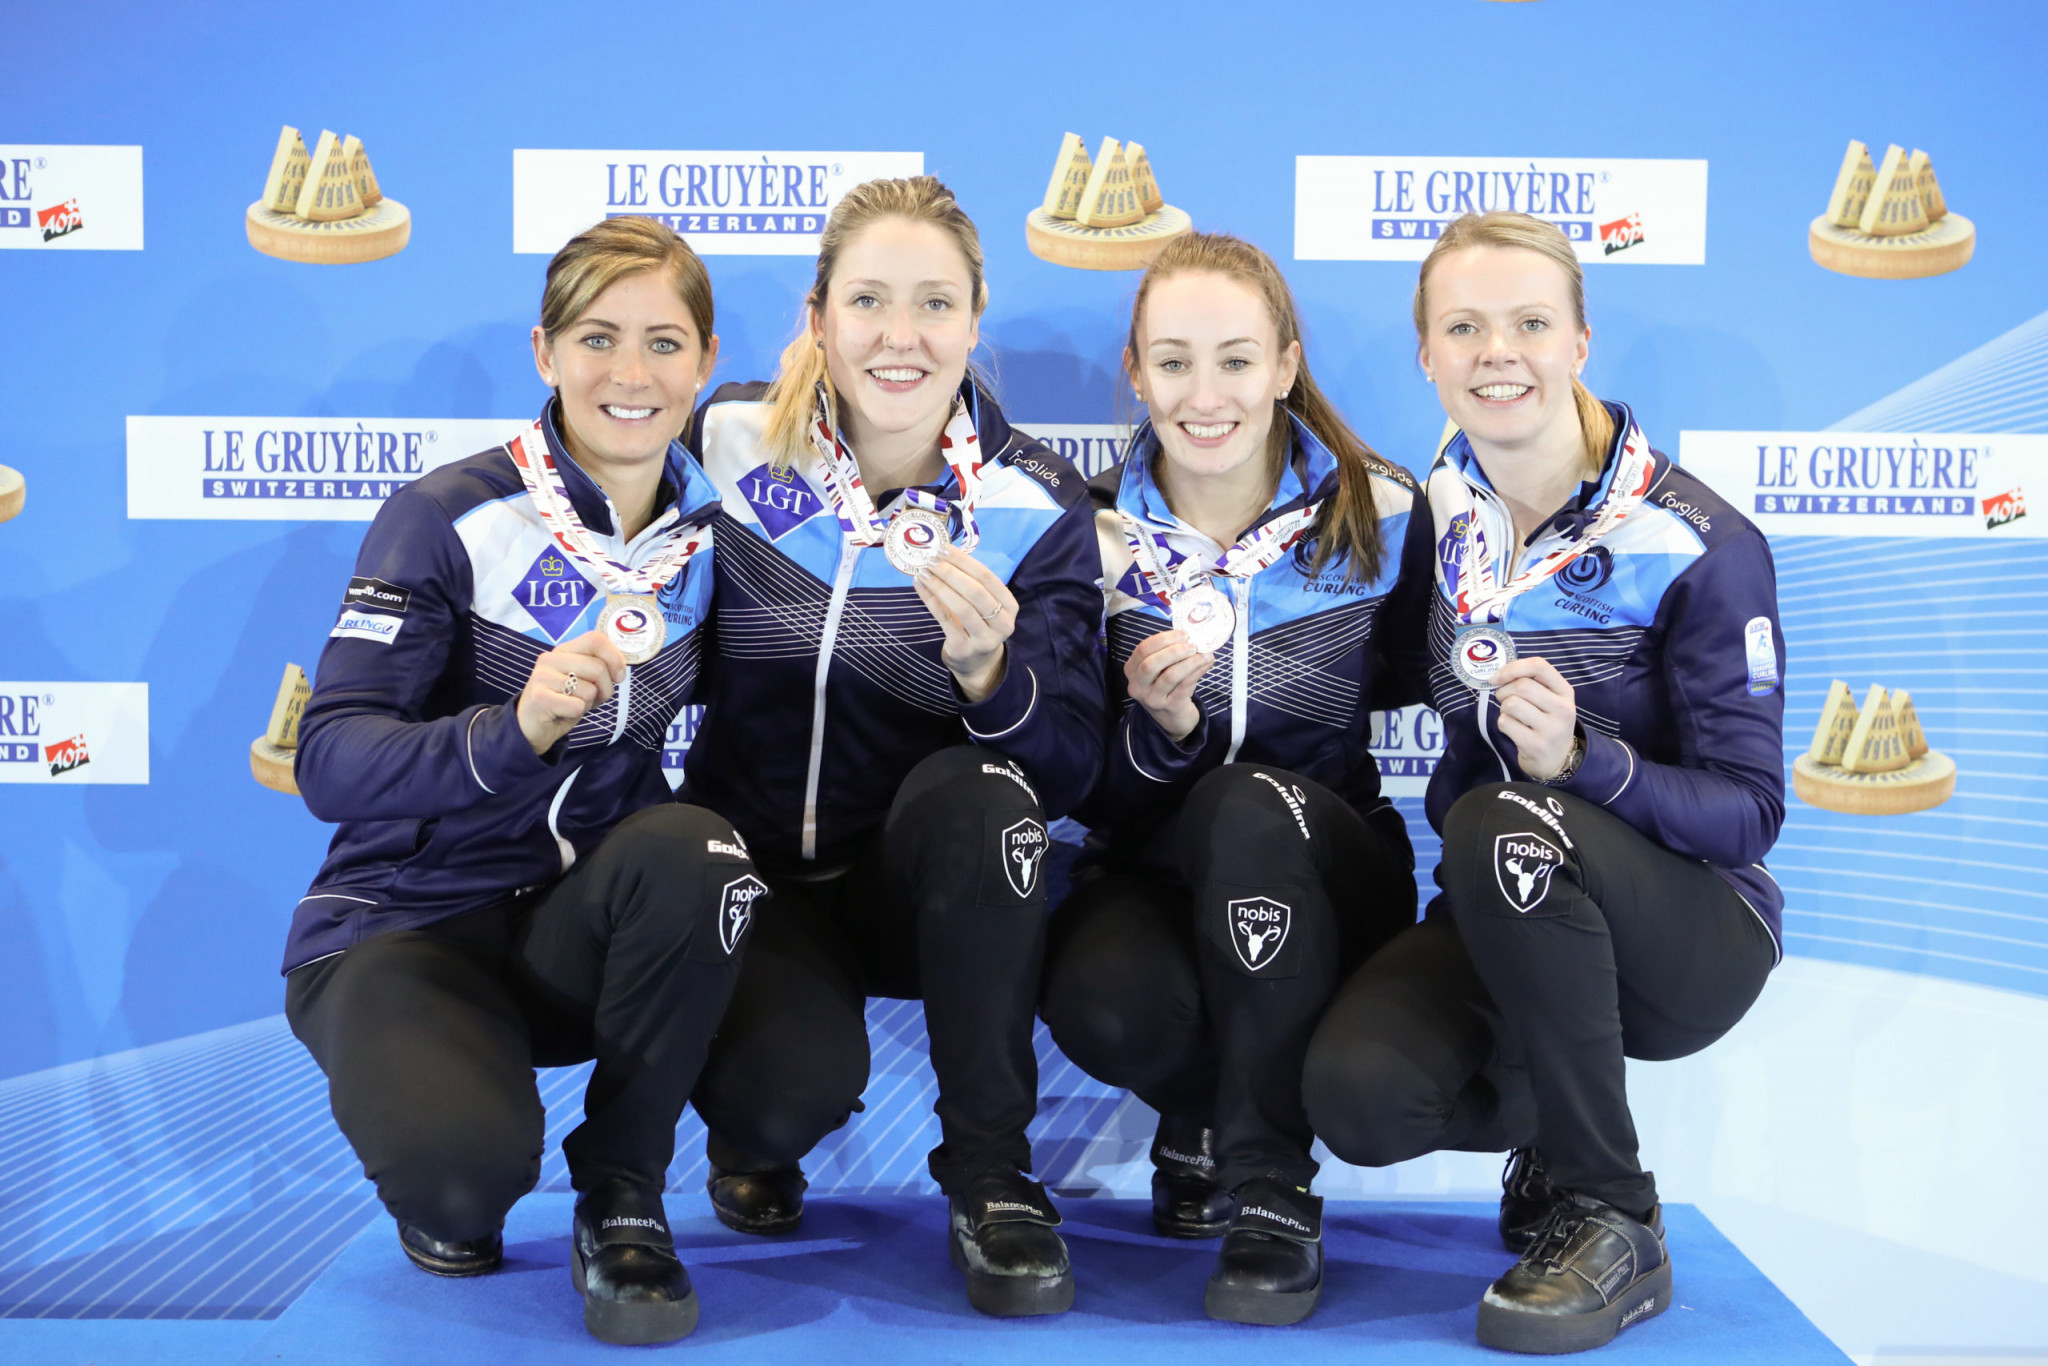 Wright was part of the Scotland team that lost to Sweden in the final of the 2019 European Curling Championships ©WCF/Richard Gray